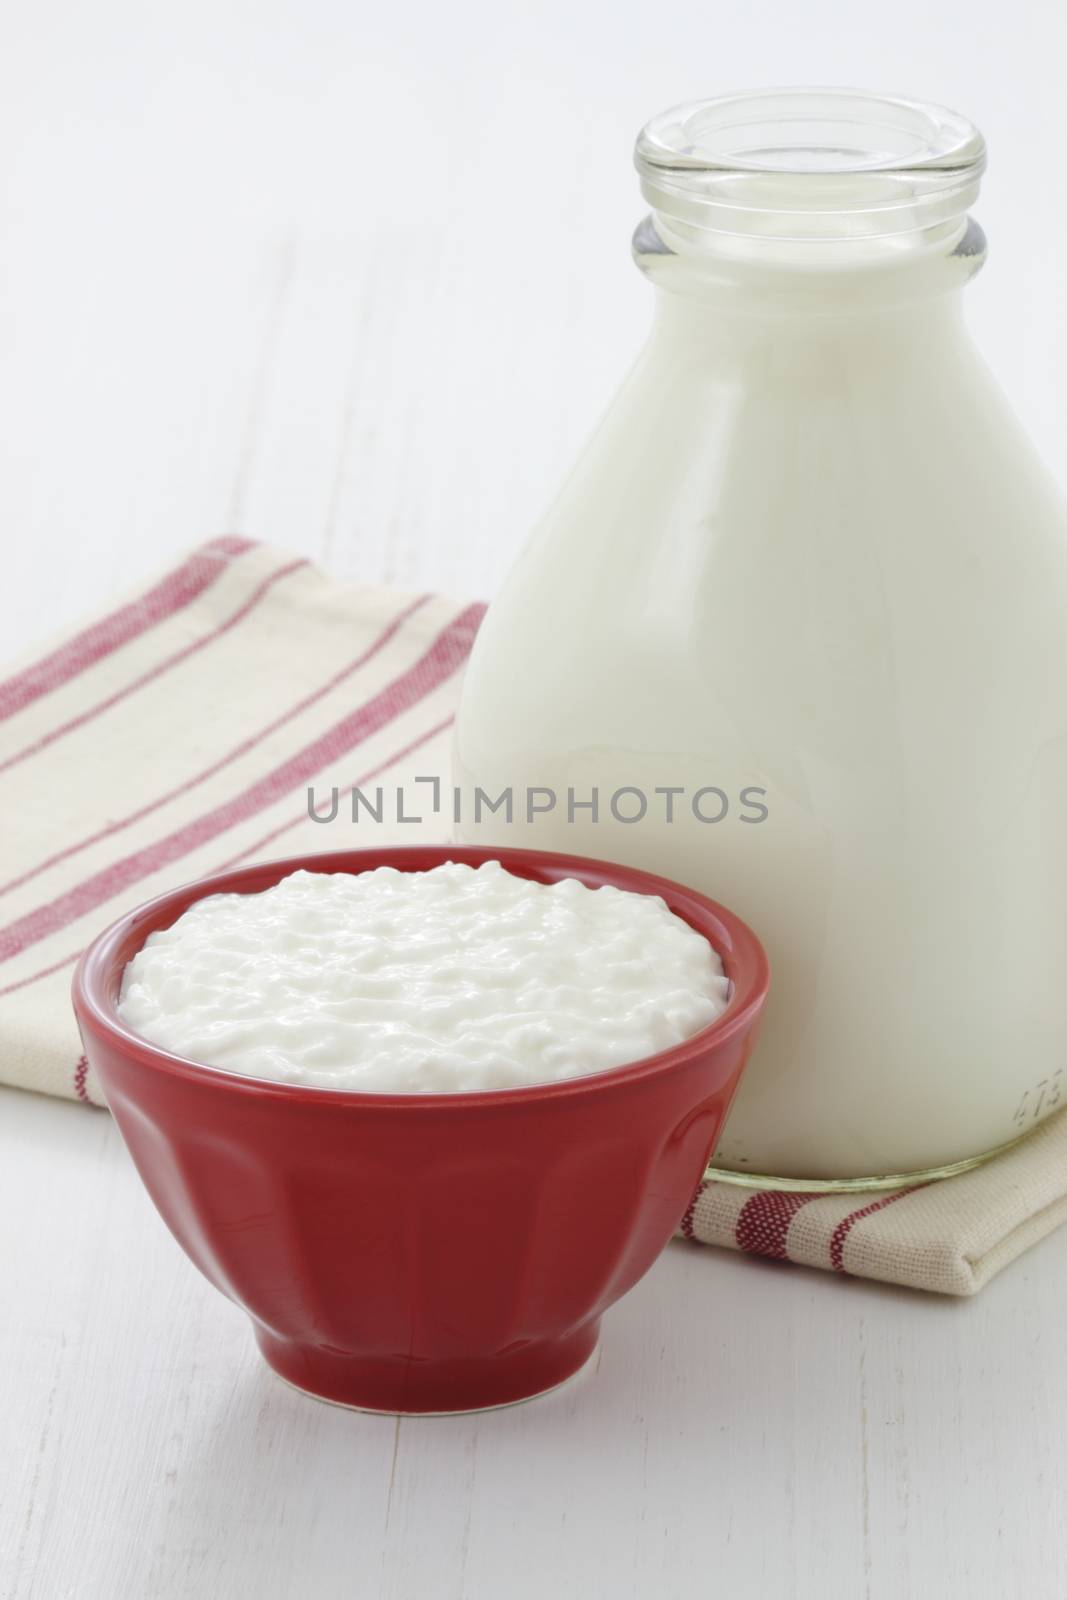 Cottage cheese and fresh milk on vintage french table linen.